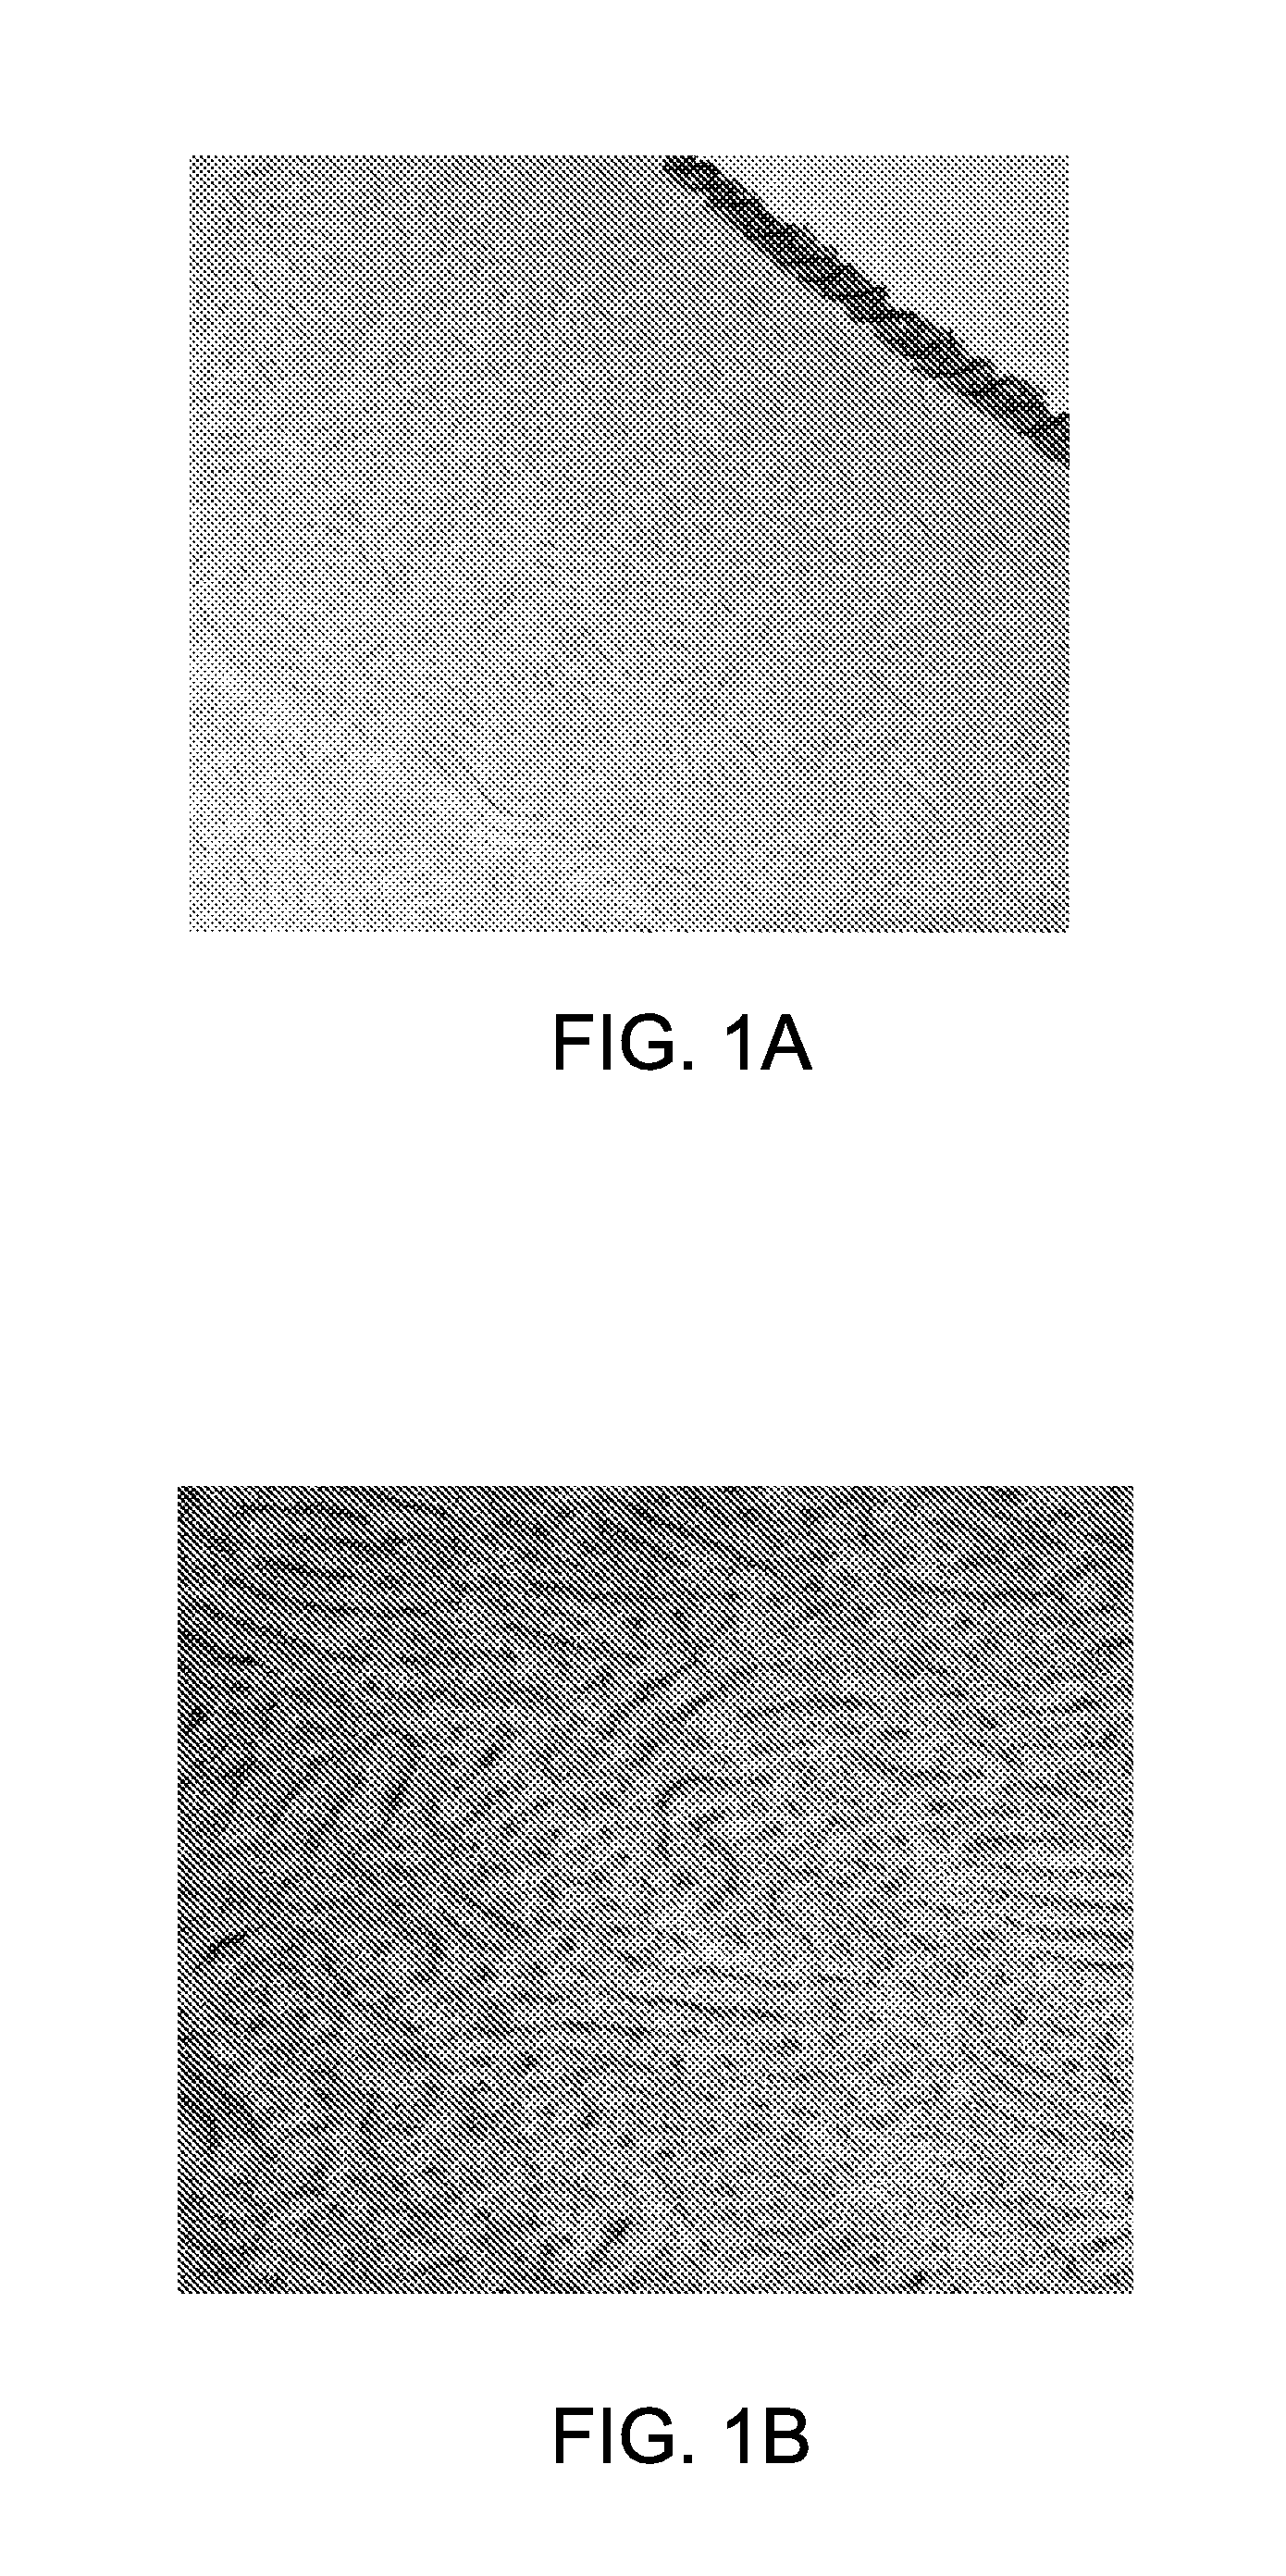 Block copolymer membranes and associated methods for making the same